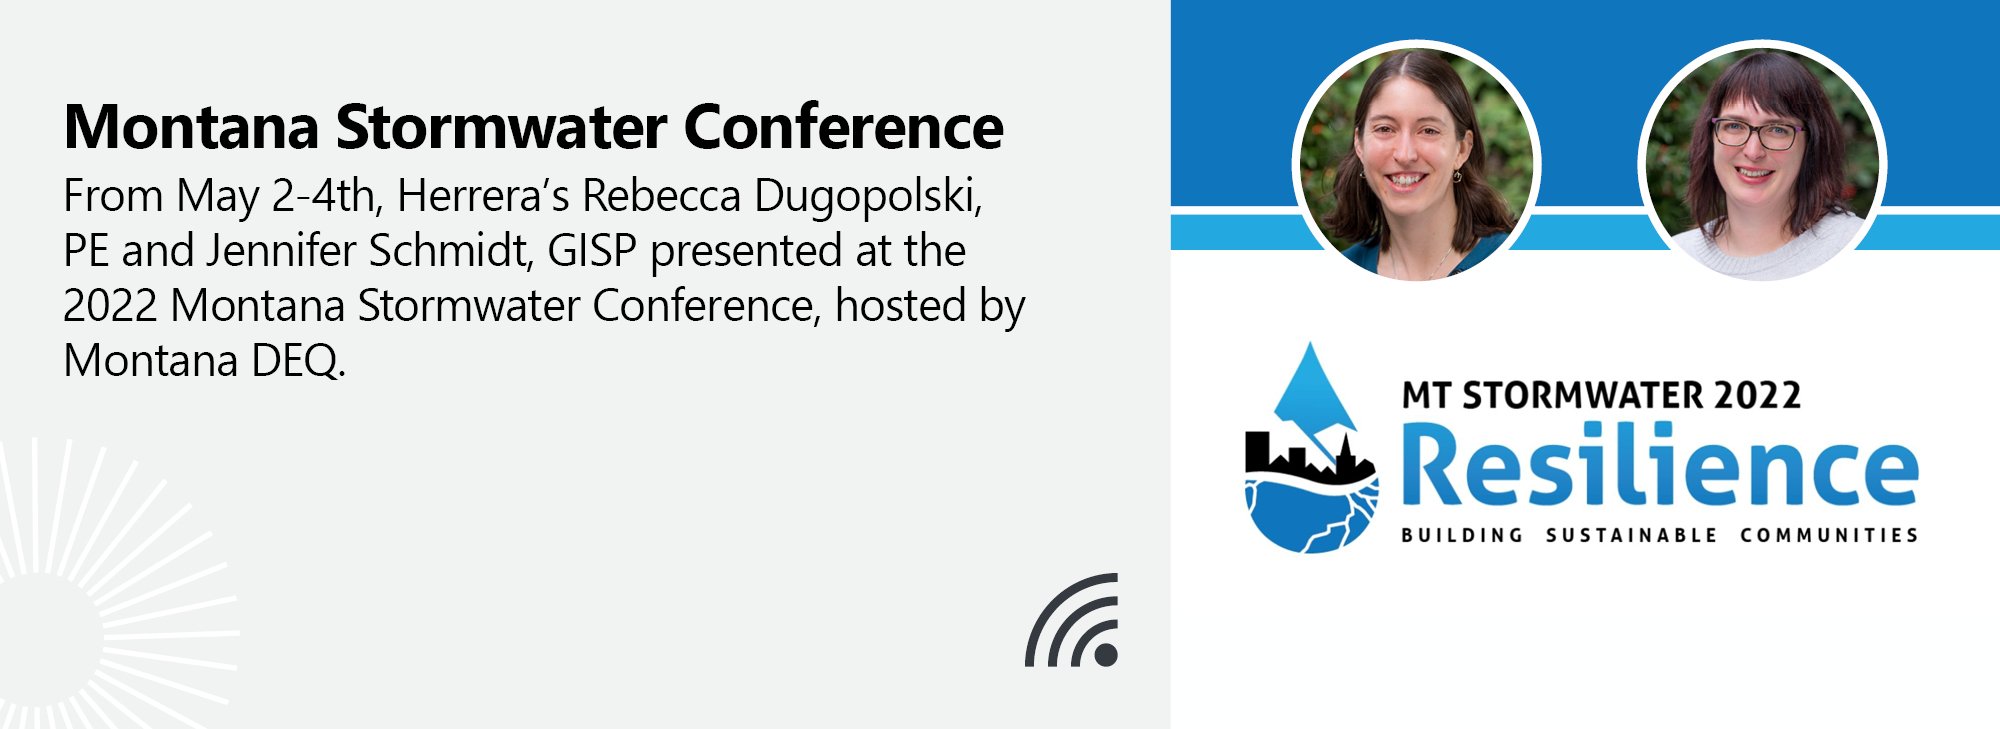 Q2-montana-stormwater-conference